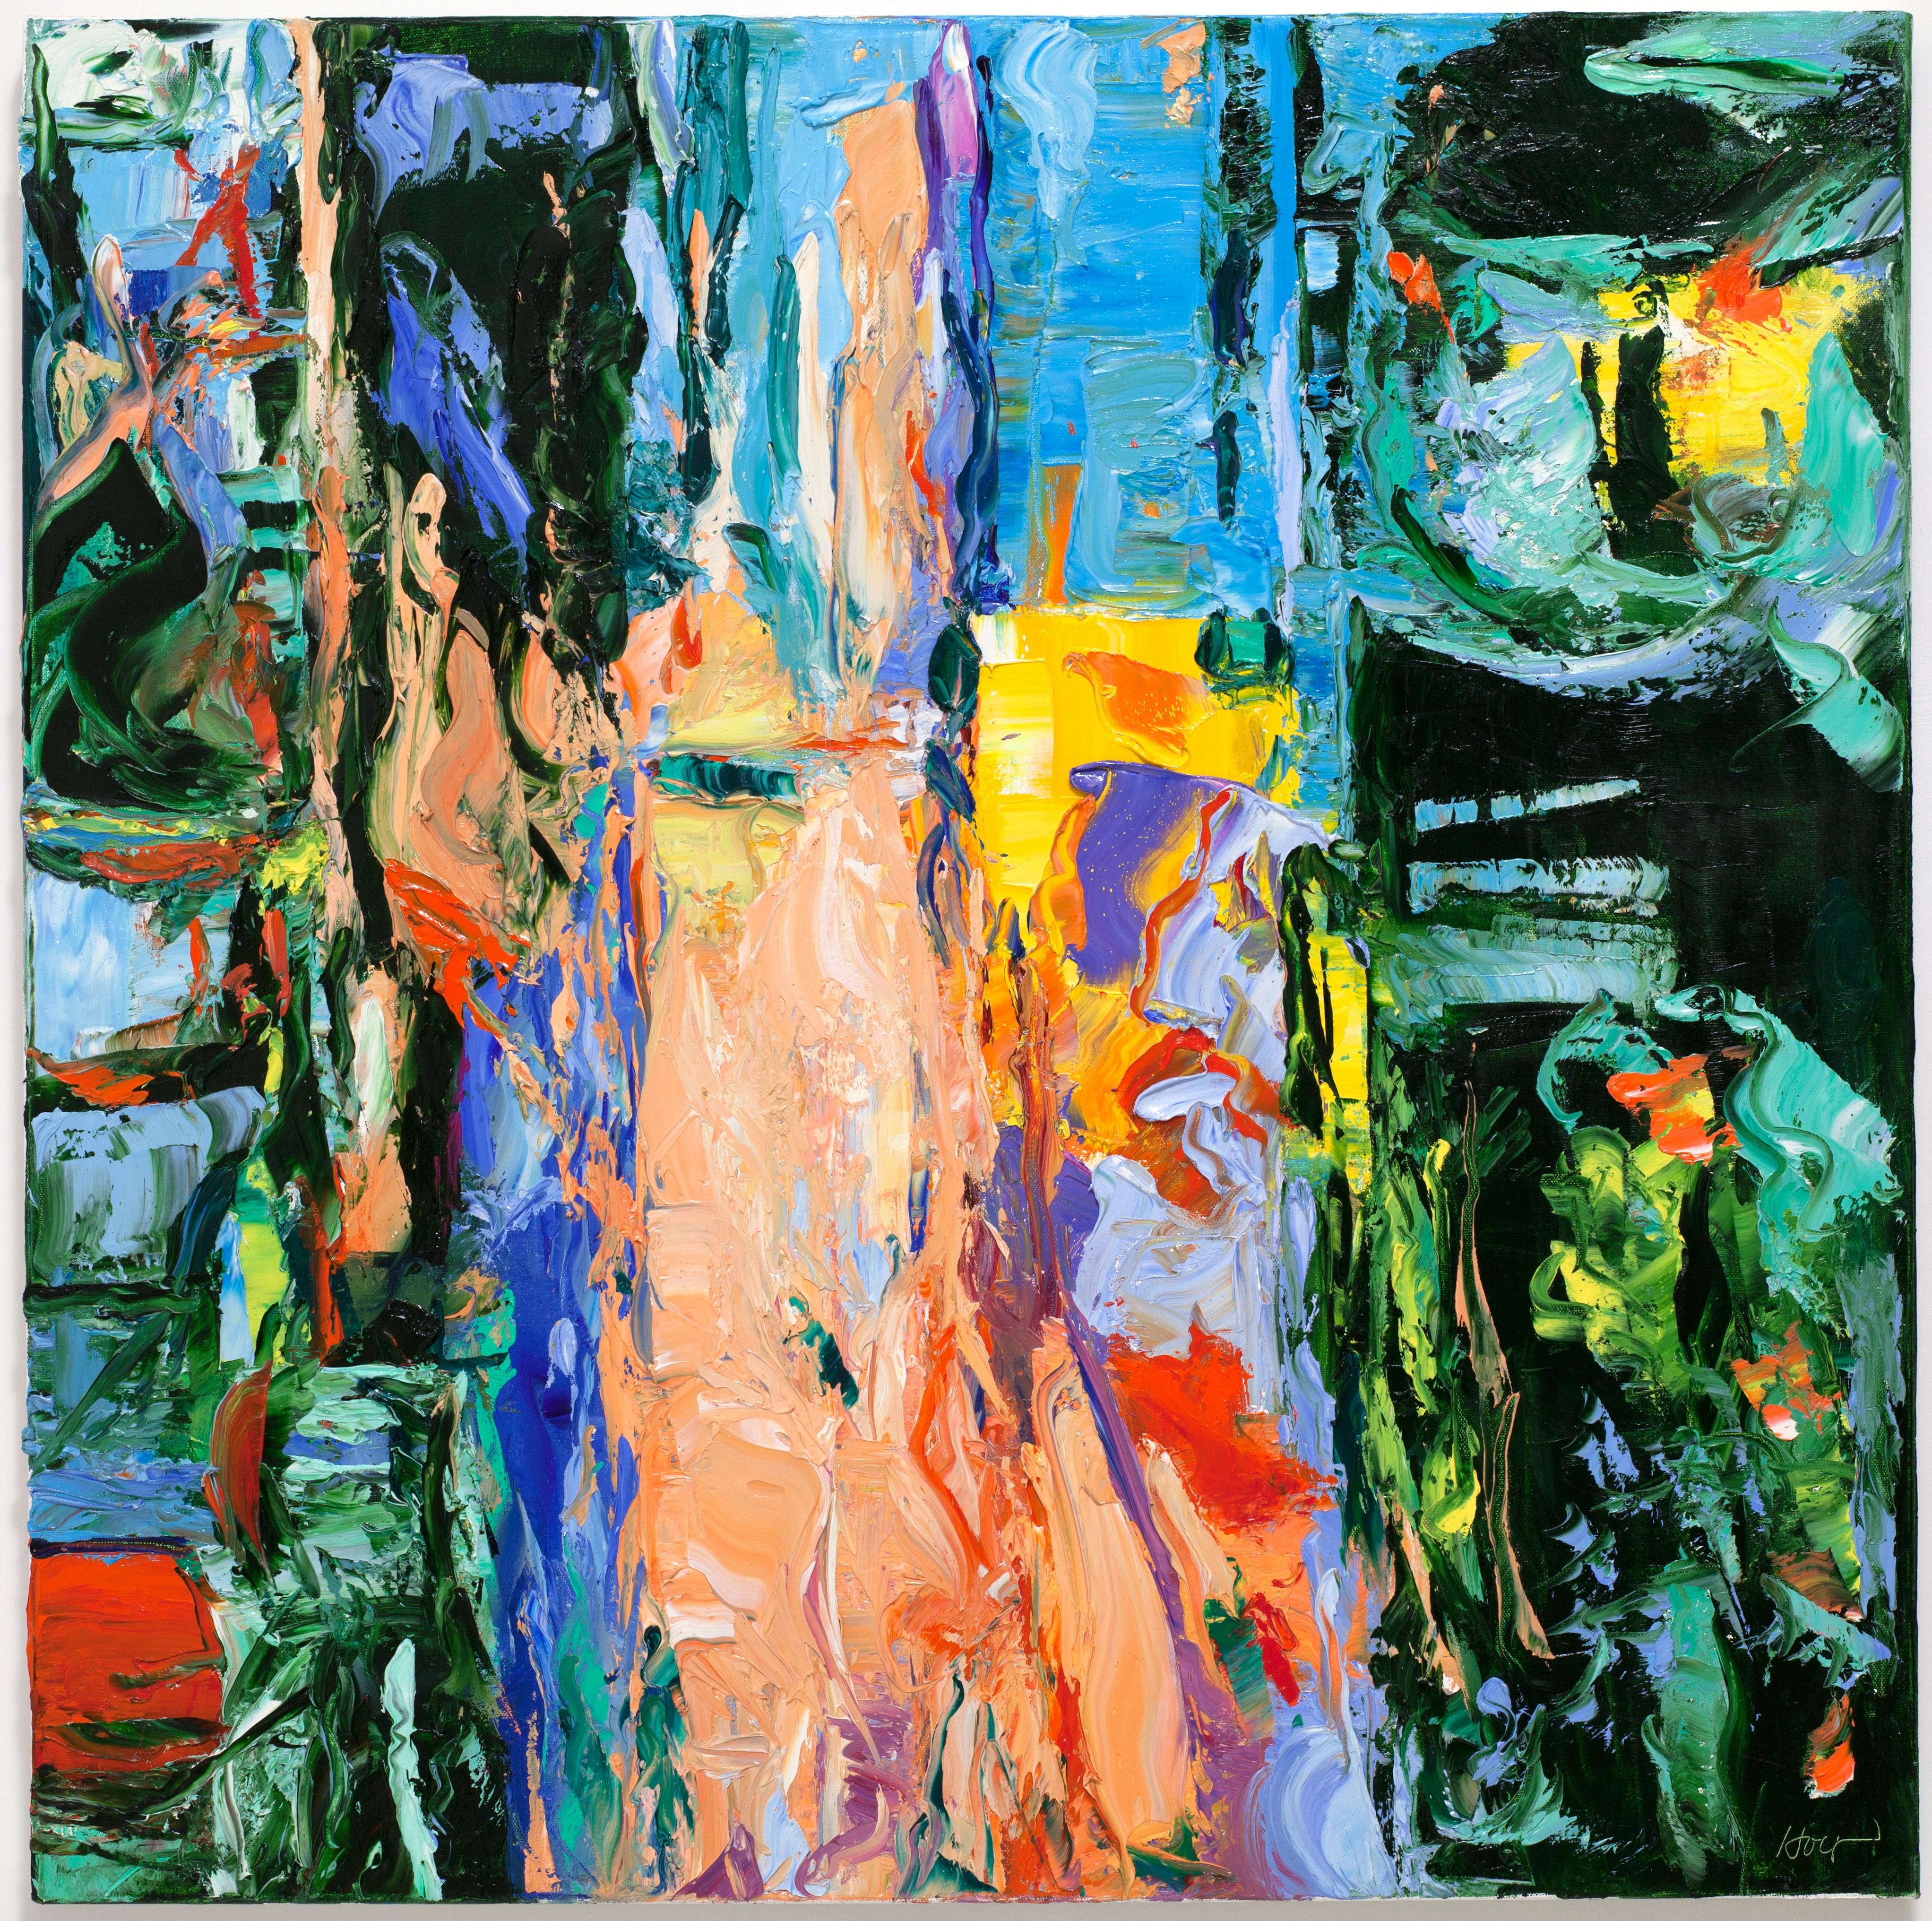 Linda Holt Abstract Painting - "Large Abstraction, After De Kooning, Black, Blue, Green, Red, Yellow, Salmon"